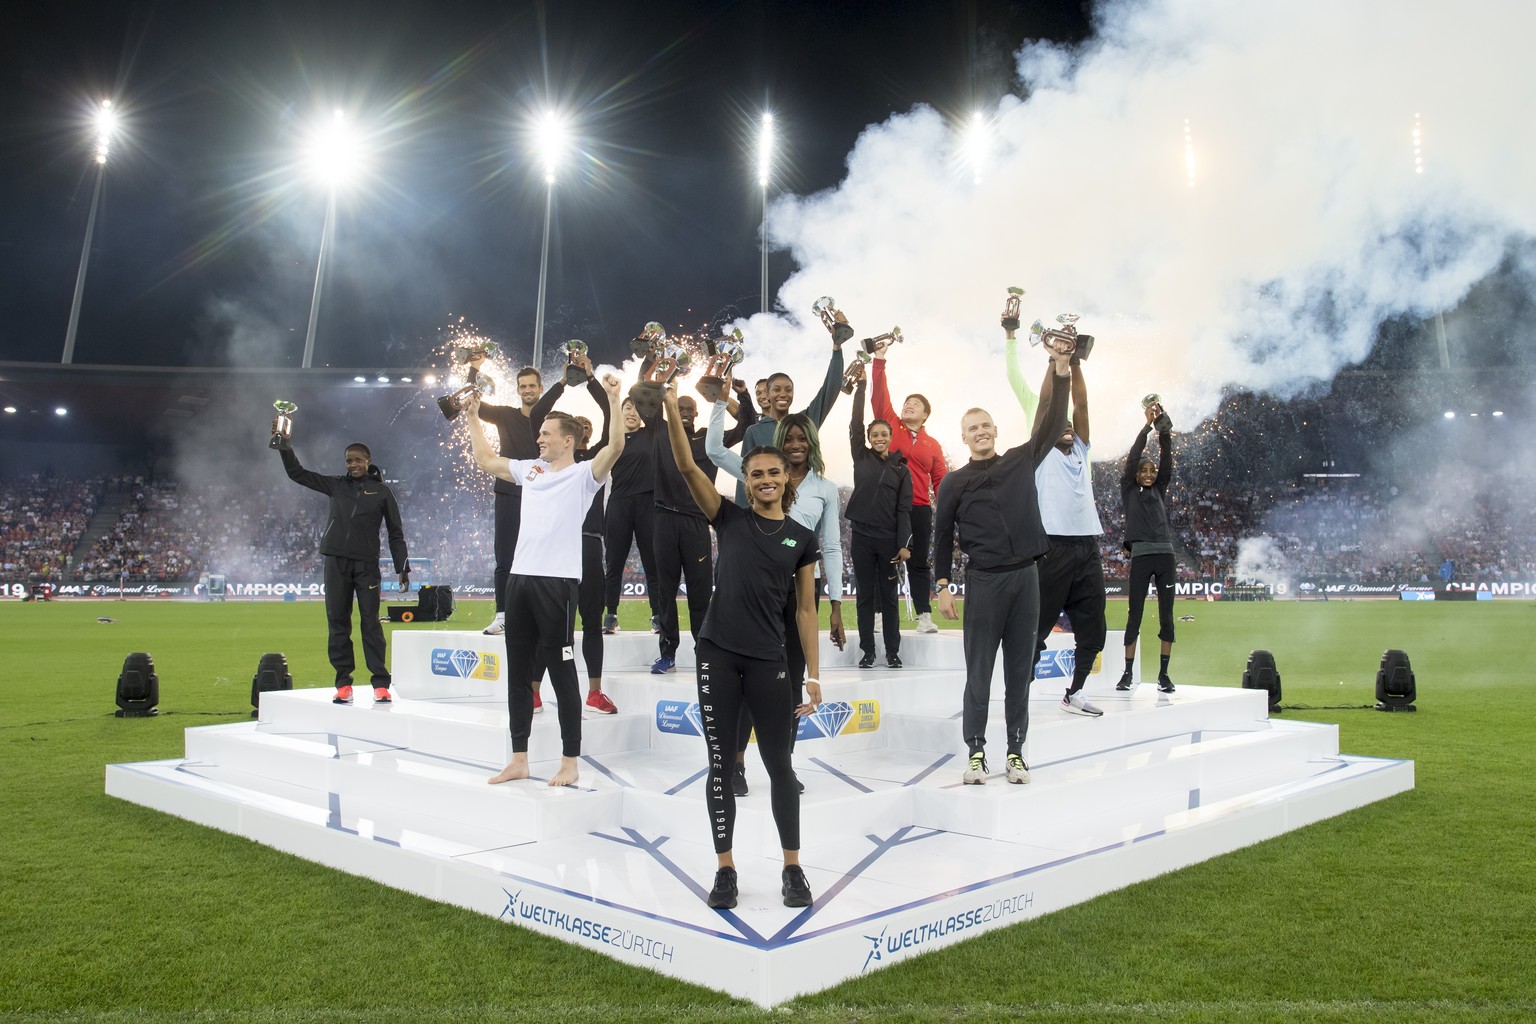 The winners of the Diamond League trophies pose at the ceremony during the Weltklasse IAAF Diamond League international athletics meeting in the stadium Letzigrund in Zurich, Switzerland, Thursday, Au ...